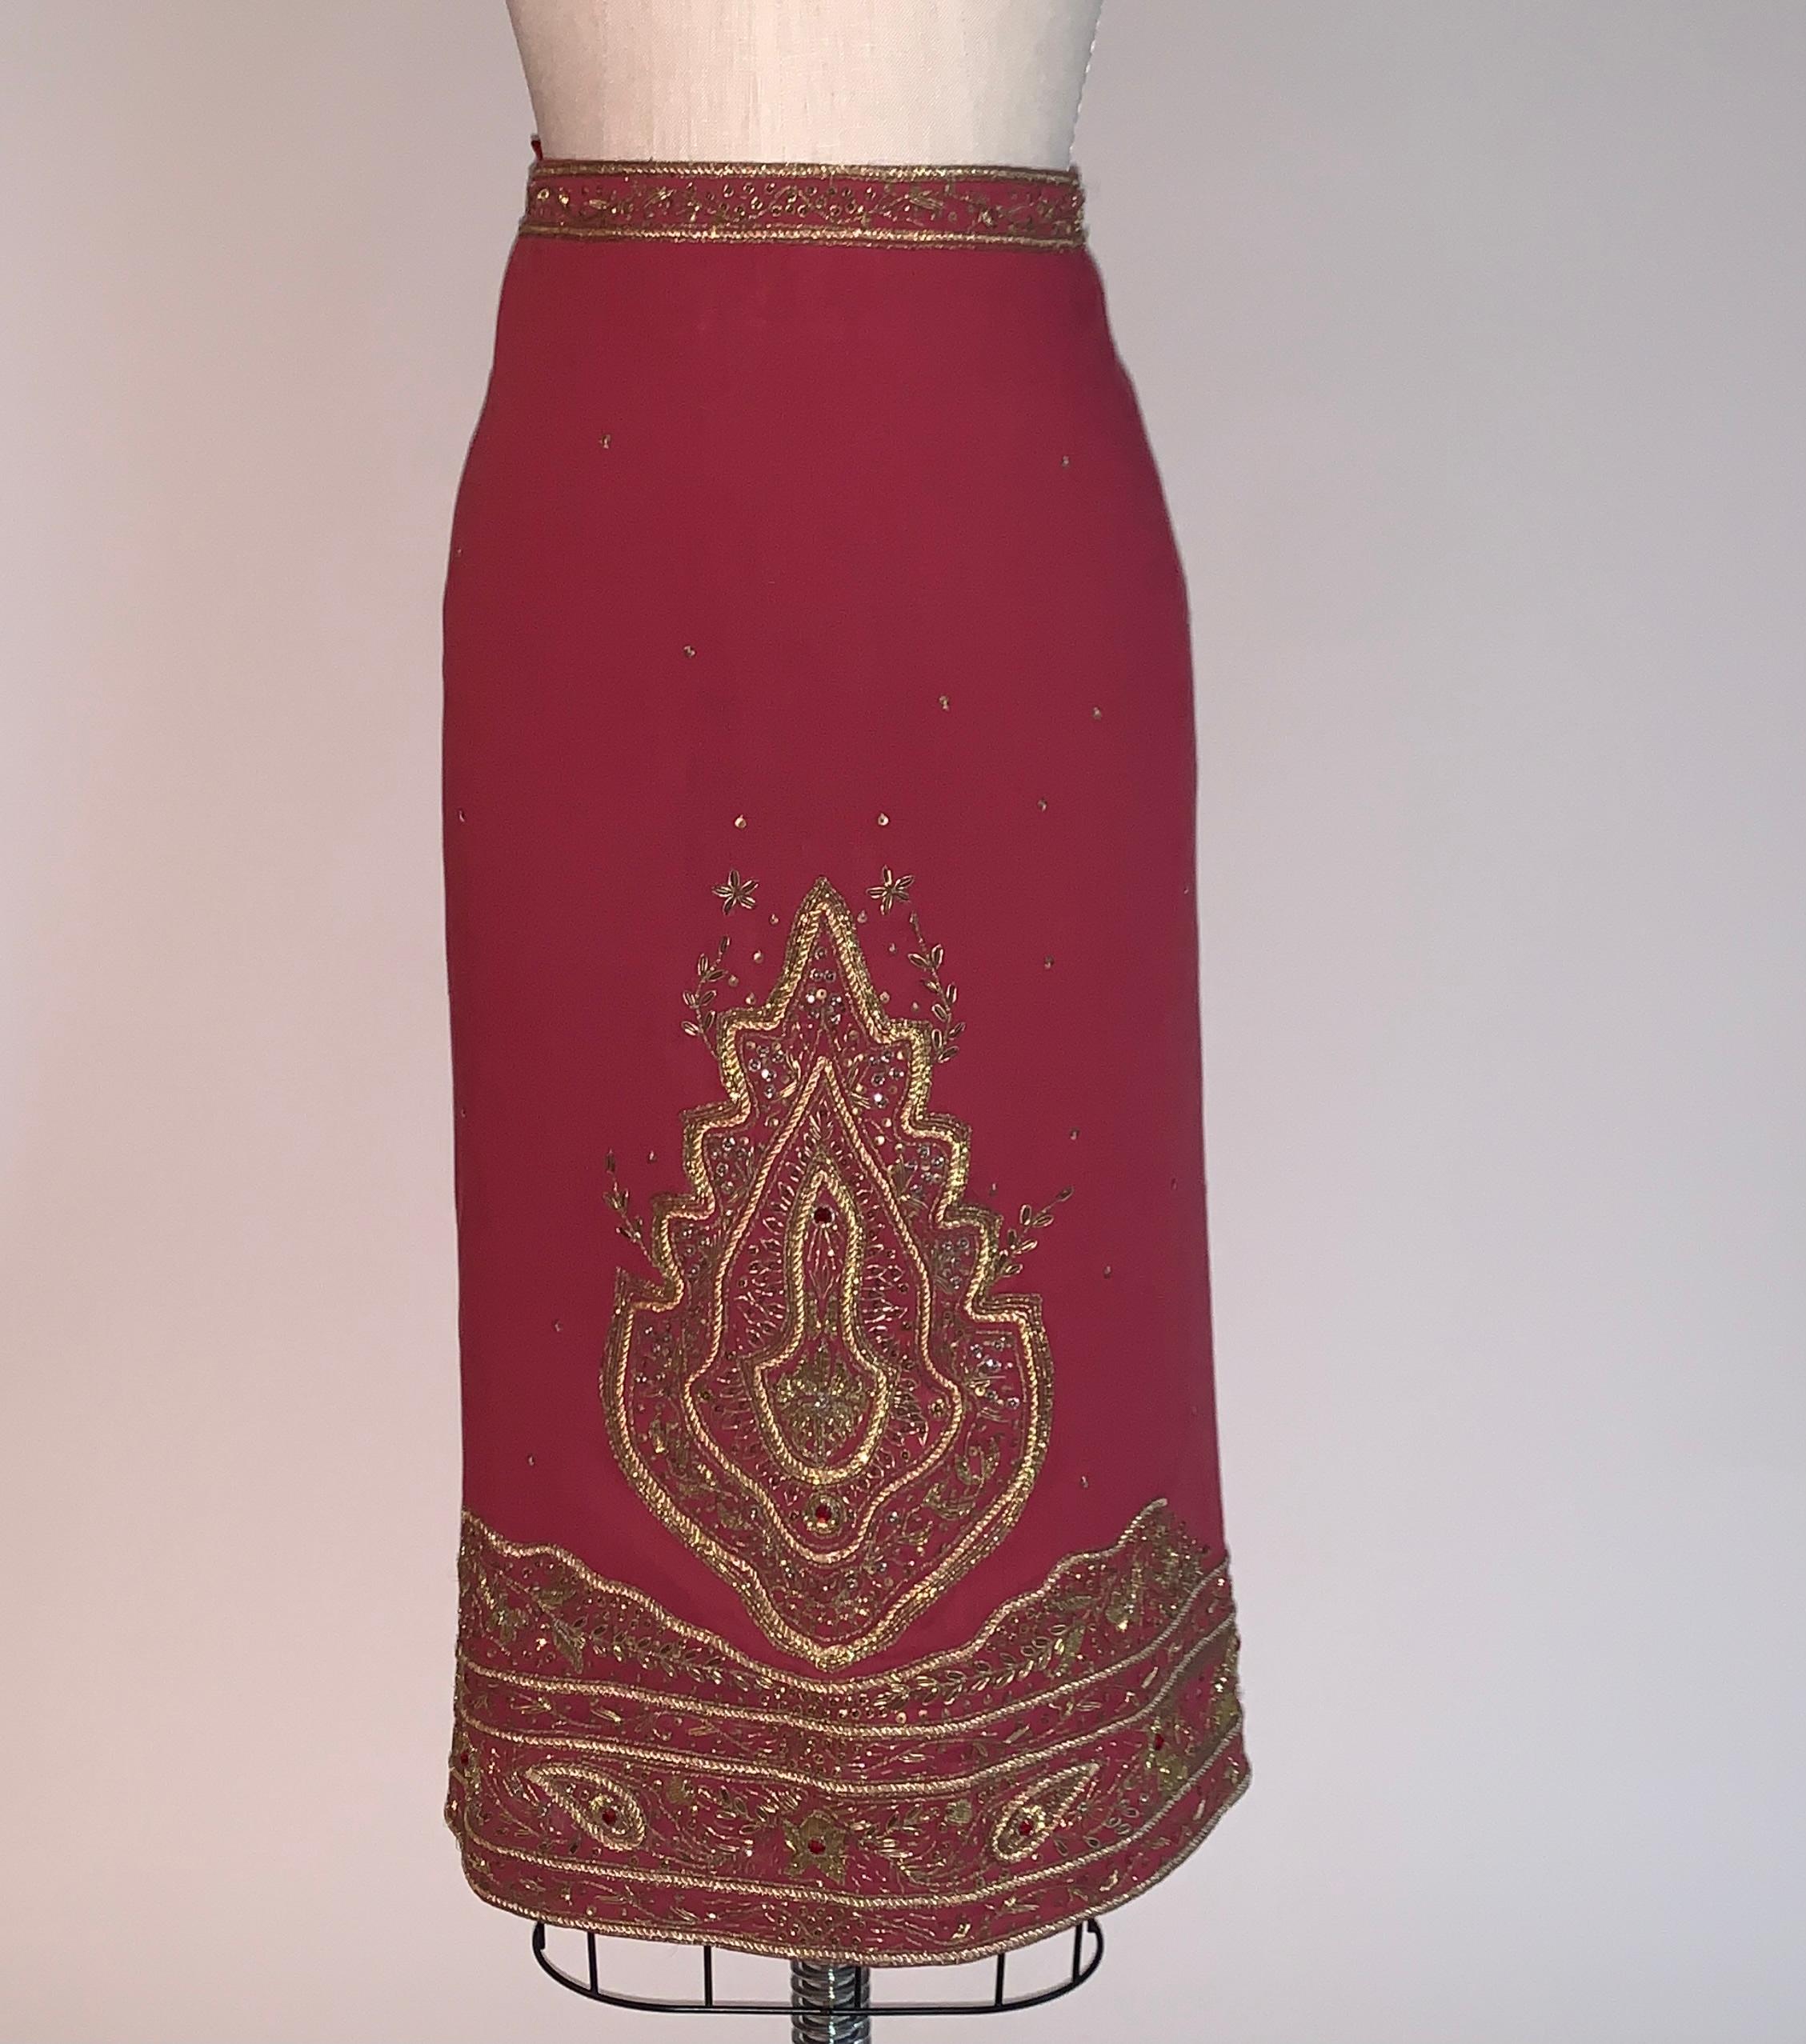 Alexander McQueen vintage 2000s  burgundy pencil skirt with intricate gold embroidered embellishment throughout. Metallic wrapped thread and cording is accented with antiqued sequins and red crystals throughout.  Back zip and hook and eye.

55%